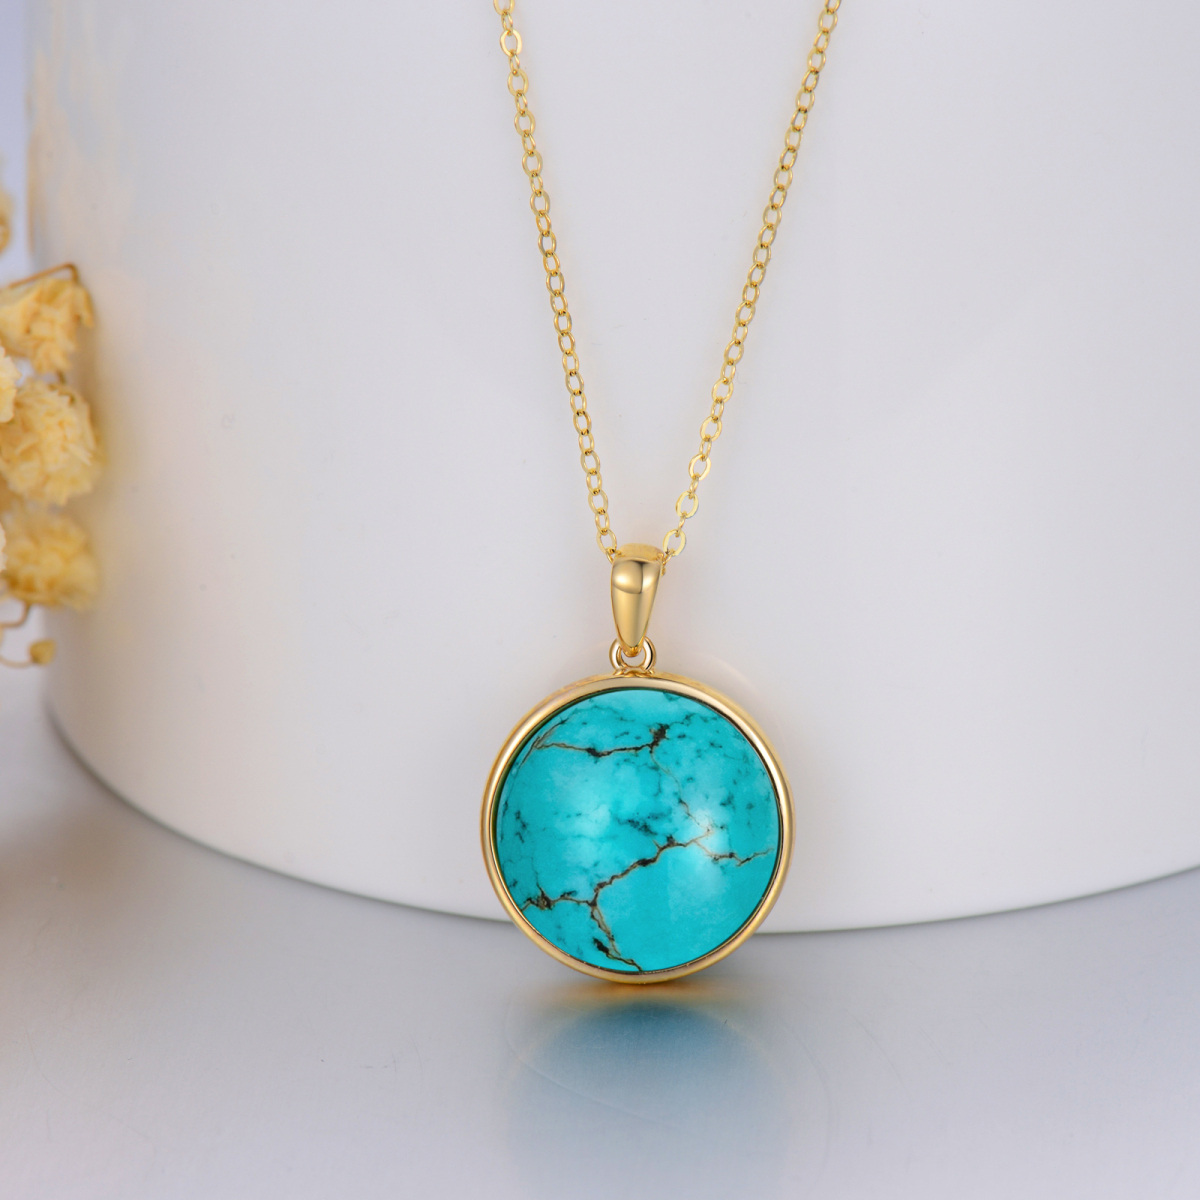 14K Gold Circular Shaped Turquoise Pendant Necklace-4